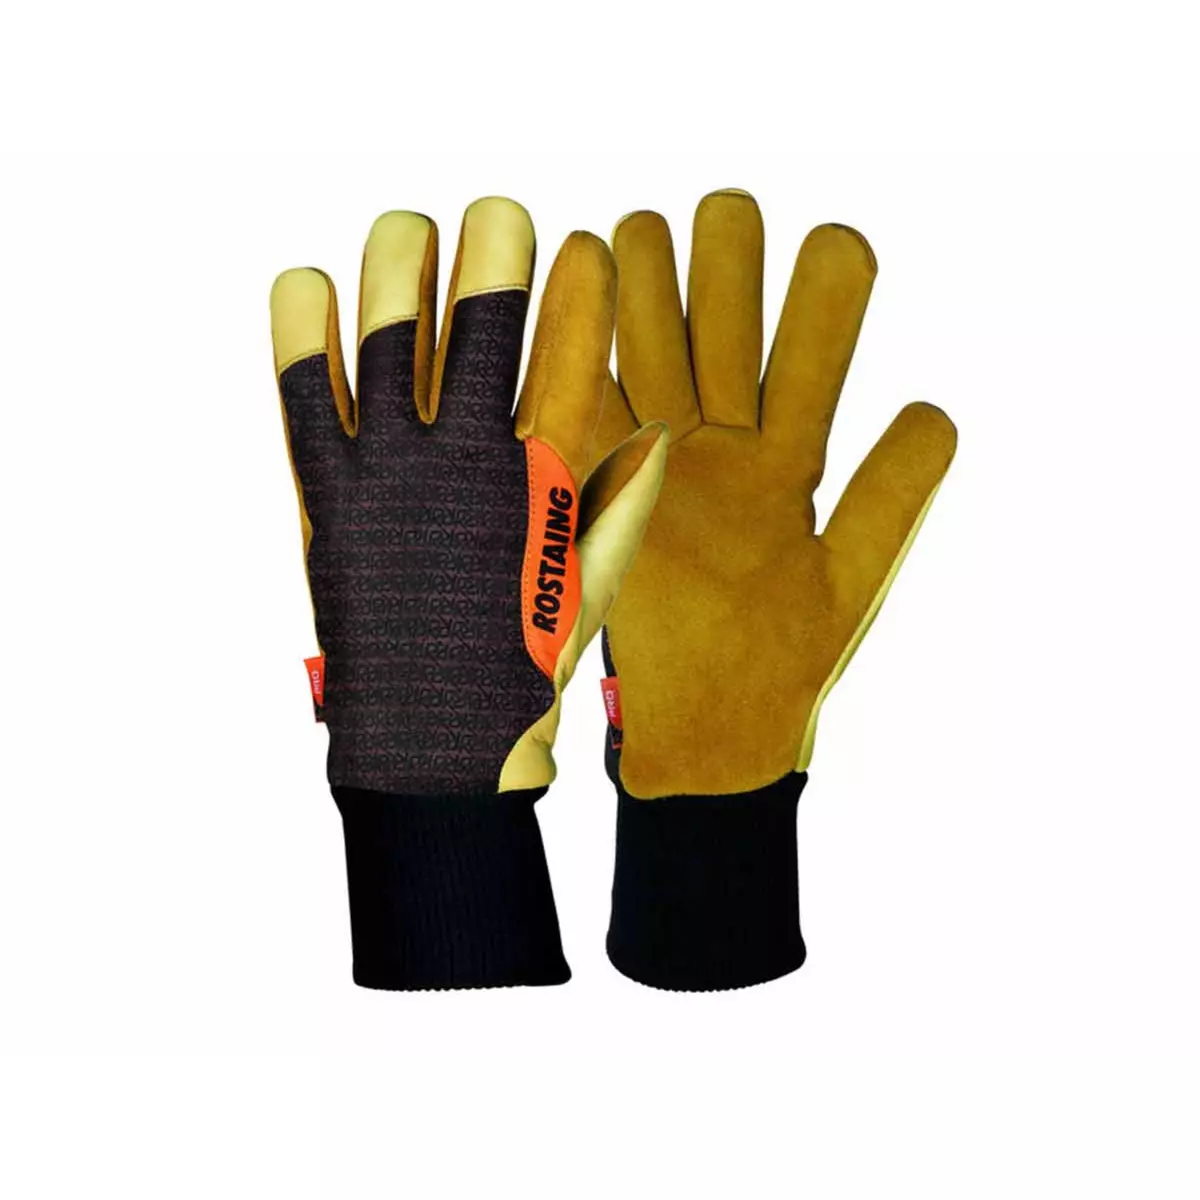 ROSTAING Gants de protection Pro Hiver - Taille 10 - Rostaing